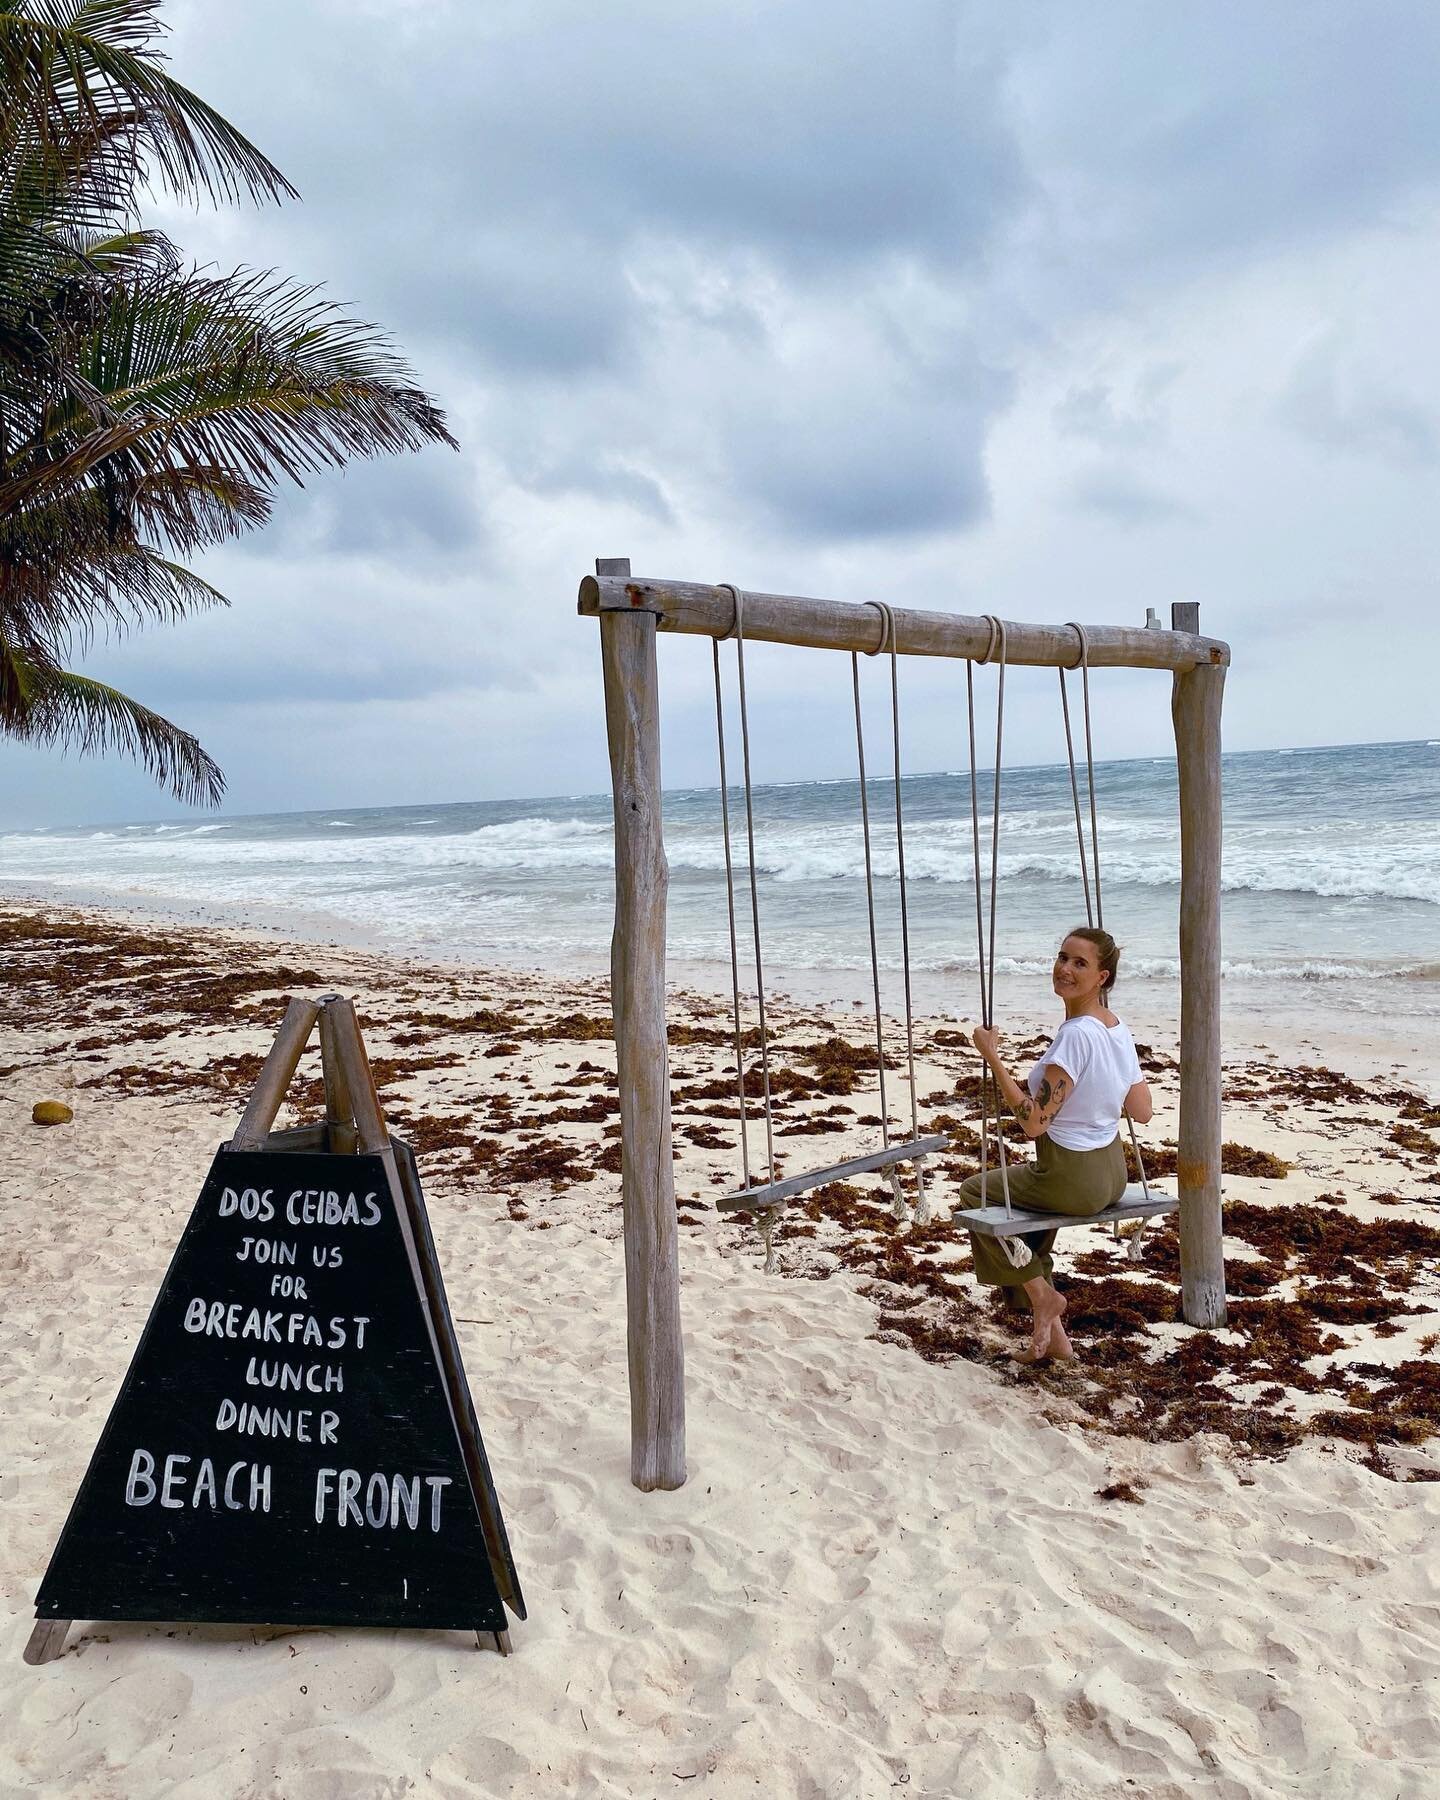 Relaxing in the feel good hotel @dosceibas 🌳 The place is welcoming guests for over 25 years at the white coral beach of Tulum. Here, you can still feel the vibe from the time when Tulum still was a tranquil, unknown oceanfront village loved by back